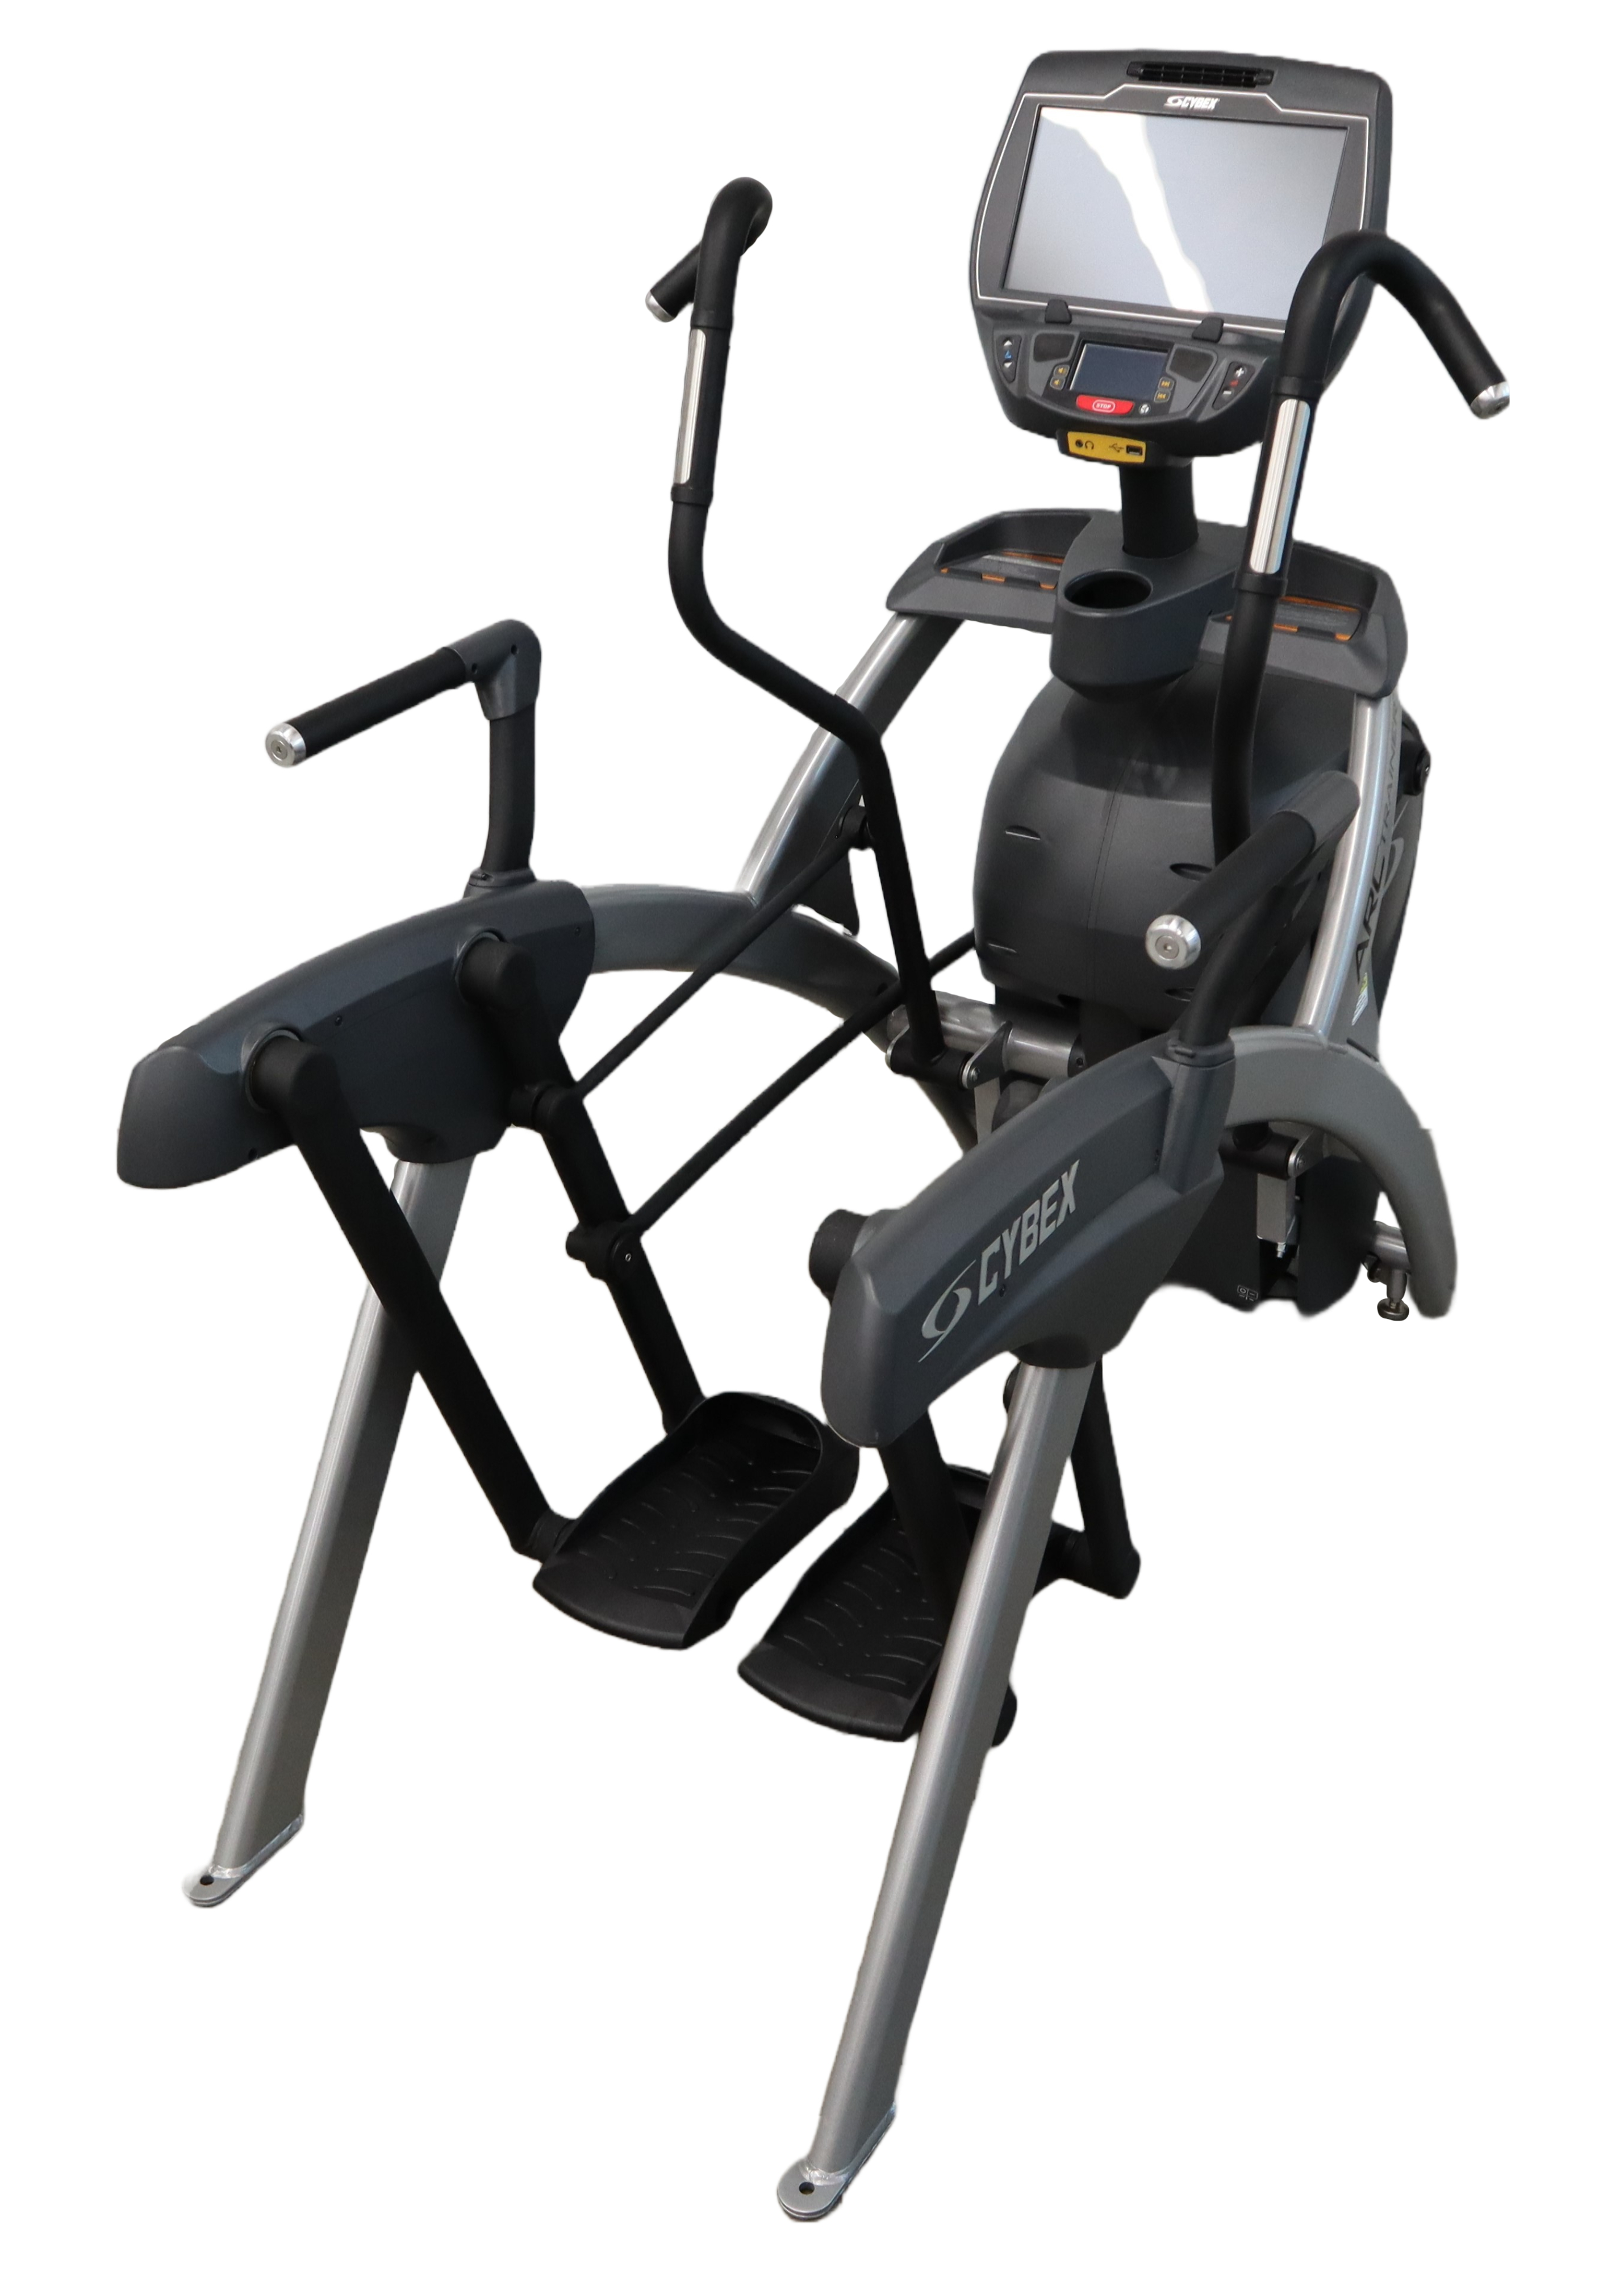 Used Cybex 772AT Total Body L11177 Arc Trainer Elliptical